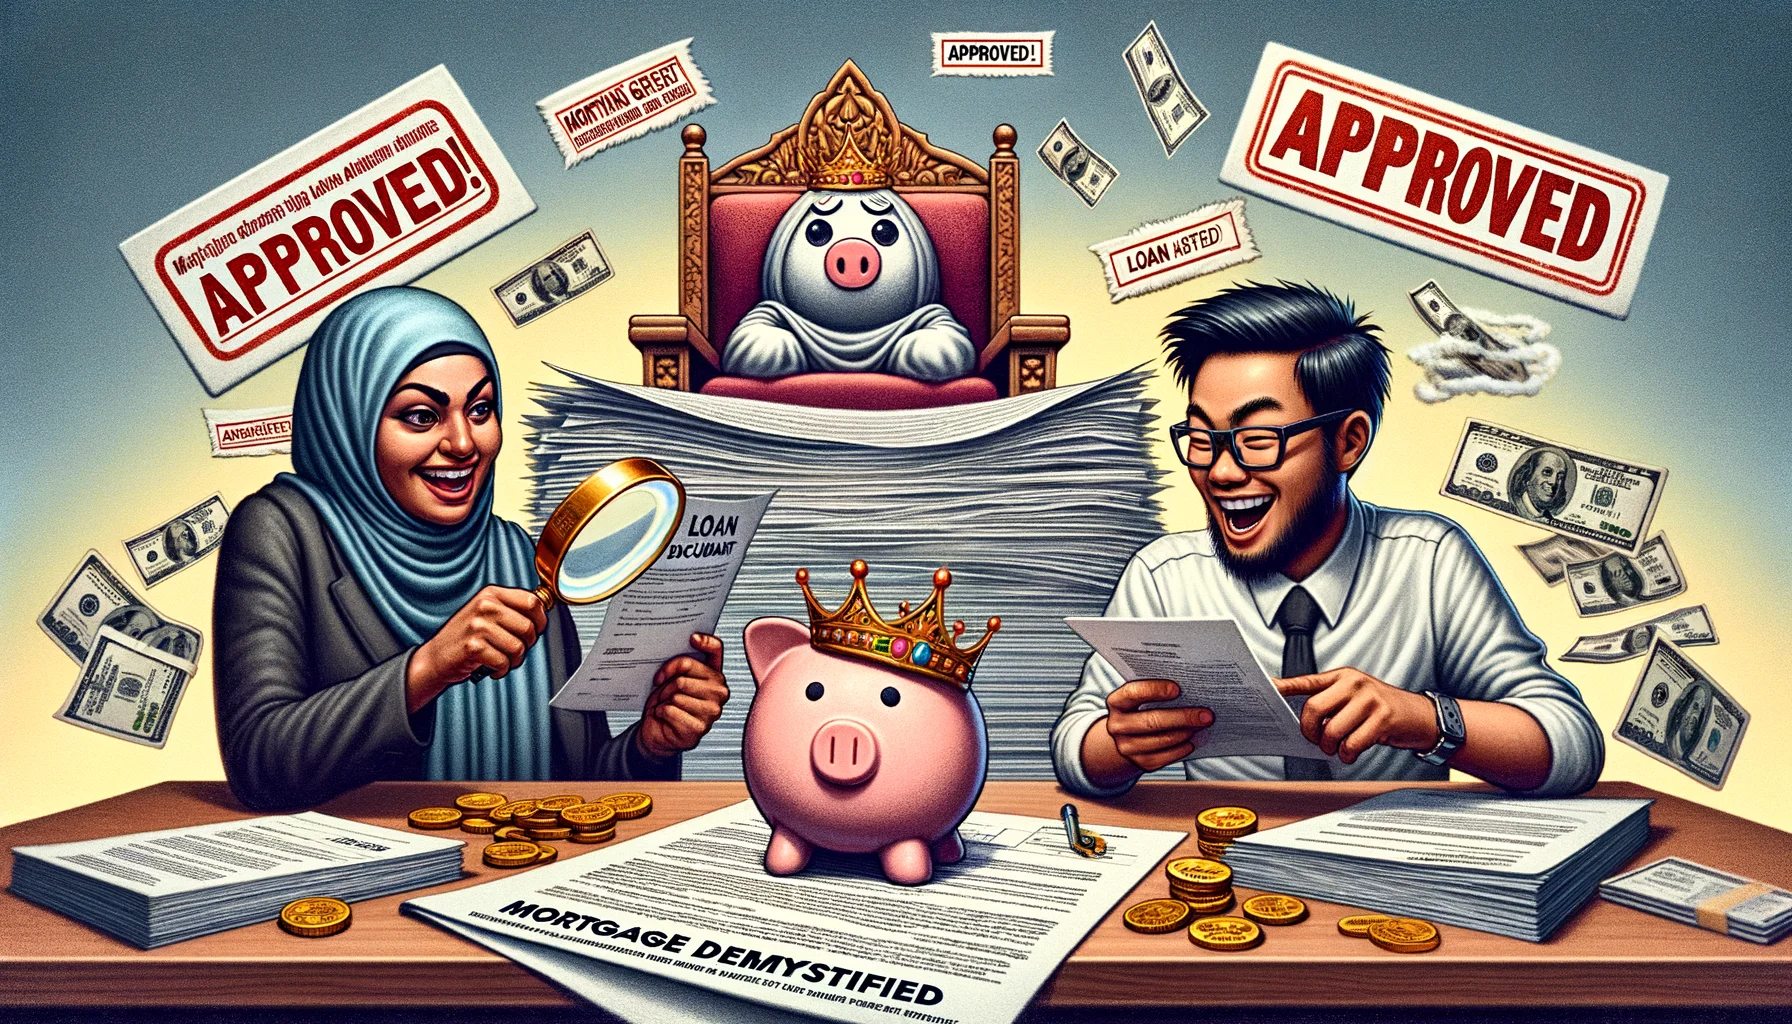 Generate a humorous, realistic image that captures the essence of mortgages and loans. Let's see a Middle-Eastern woman sitting at a desk reviewing a huge loan document with a magnifying glass. Next to her, an East-Asian man is laughing while holding a tiny document titled 'Mortgage Demystified'. The background is filled with stacks of documents marked with flashy 'Approved!' and 'Loan granted!' stamps. To add a touch of absurdity, let's have a piggy bank wearing a crown and sash labelled 'Savings' seated on a throne made of golden coins, overlooking the scene.